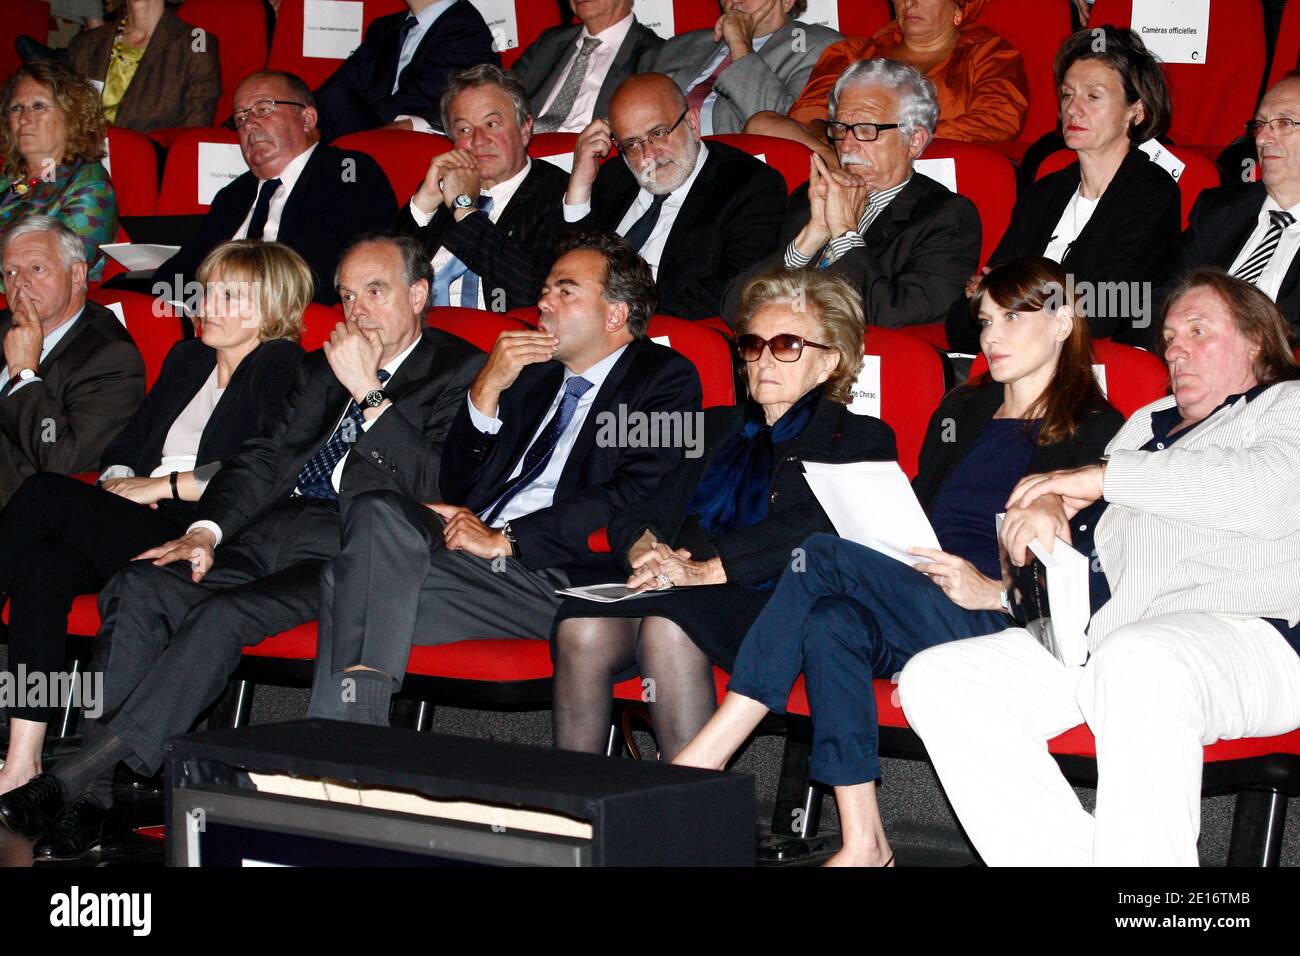 French Minister for Apprenticeships and Vocational Training Nadine Morano, Culture Minister Frederic Mitterrand, Minister for National Education, Youth and Voluntary Organizations Luc Chatel, former first lady Bernadette Chirac, French First Lady Carla Bruni-Sarkozy, actor Gerard Depardieu attend the launch of Bruni-Sarkozy's foundation to combat illiteracy at Centre Pompidou modern art museum, also known as Beaubourg, in Paris, France on May 17, 2011. French President Nicolas Sarkozy's father, Pal Sarkozy was quoted by a German newspaper Bild today as saying that first lady Carla Bruni is exp Stock Photo